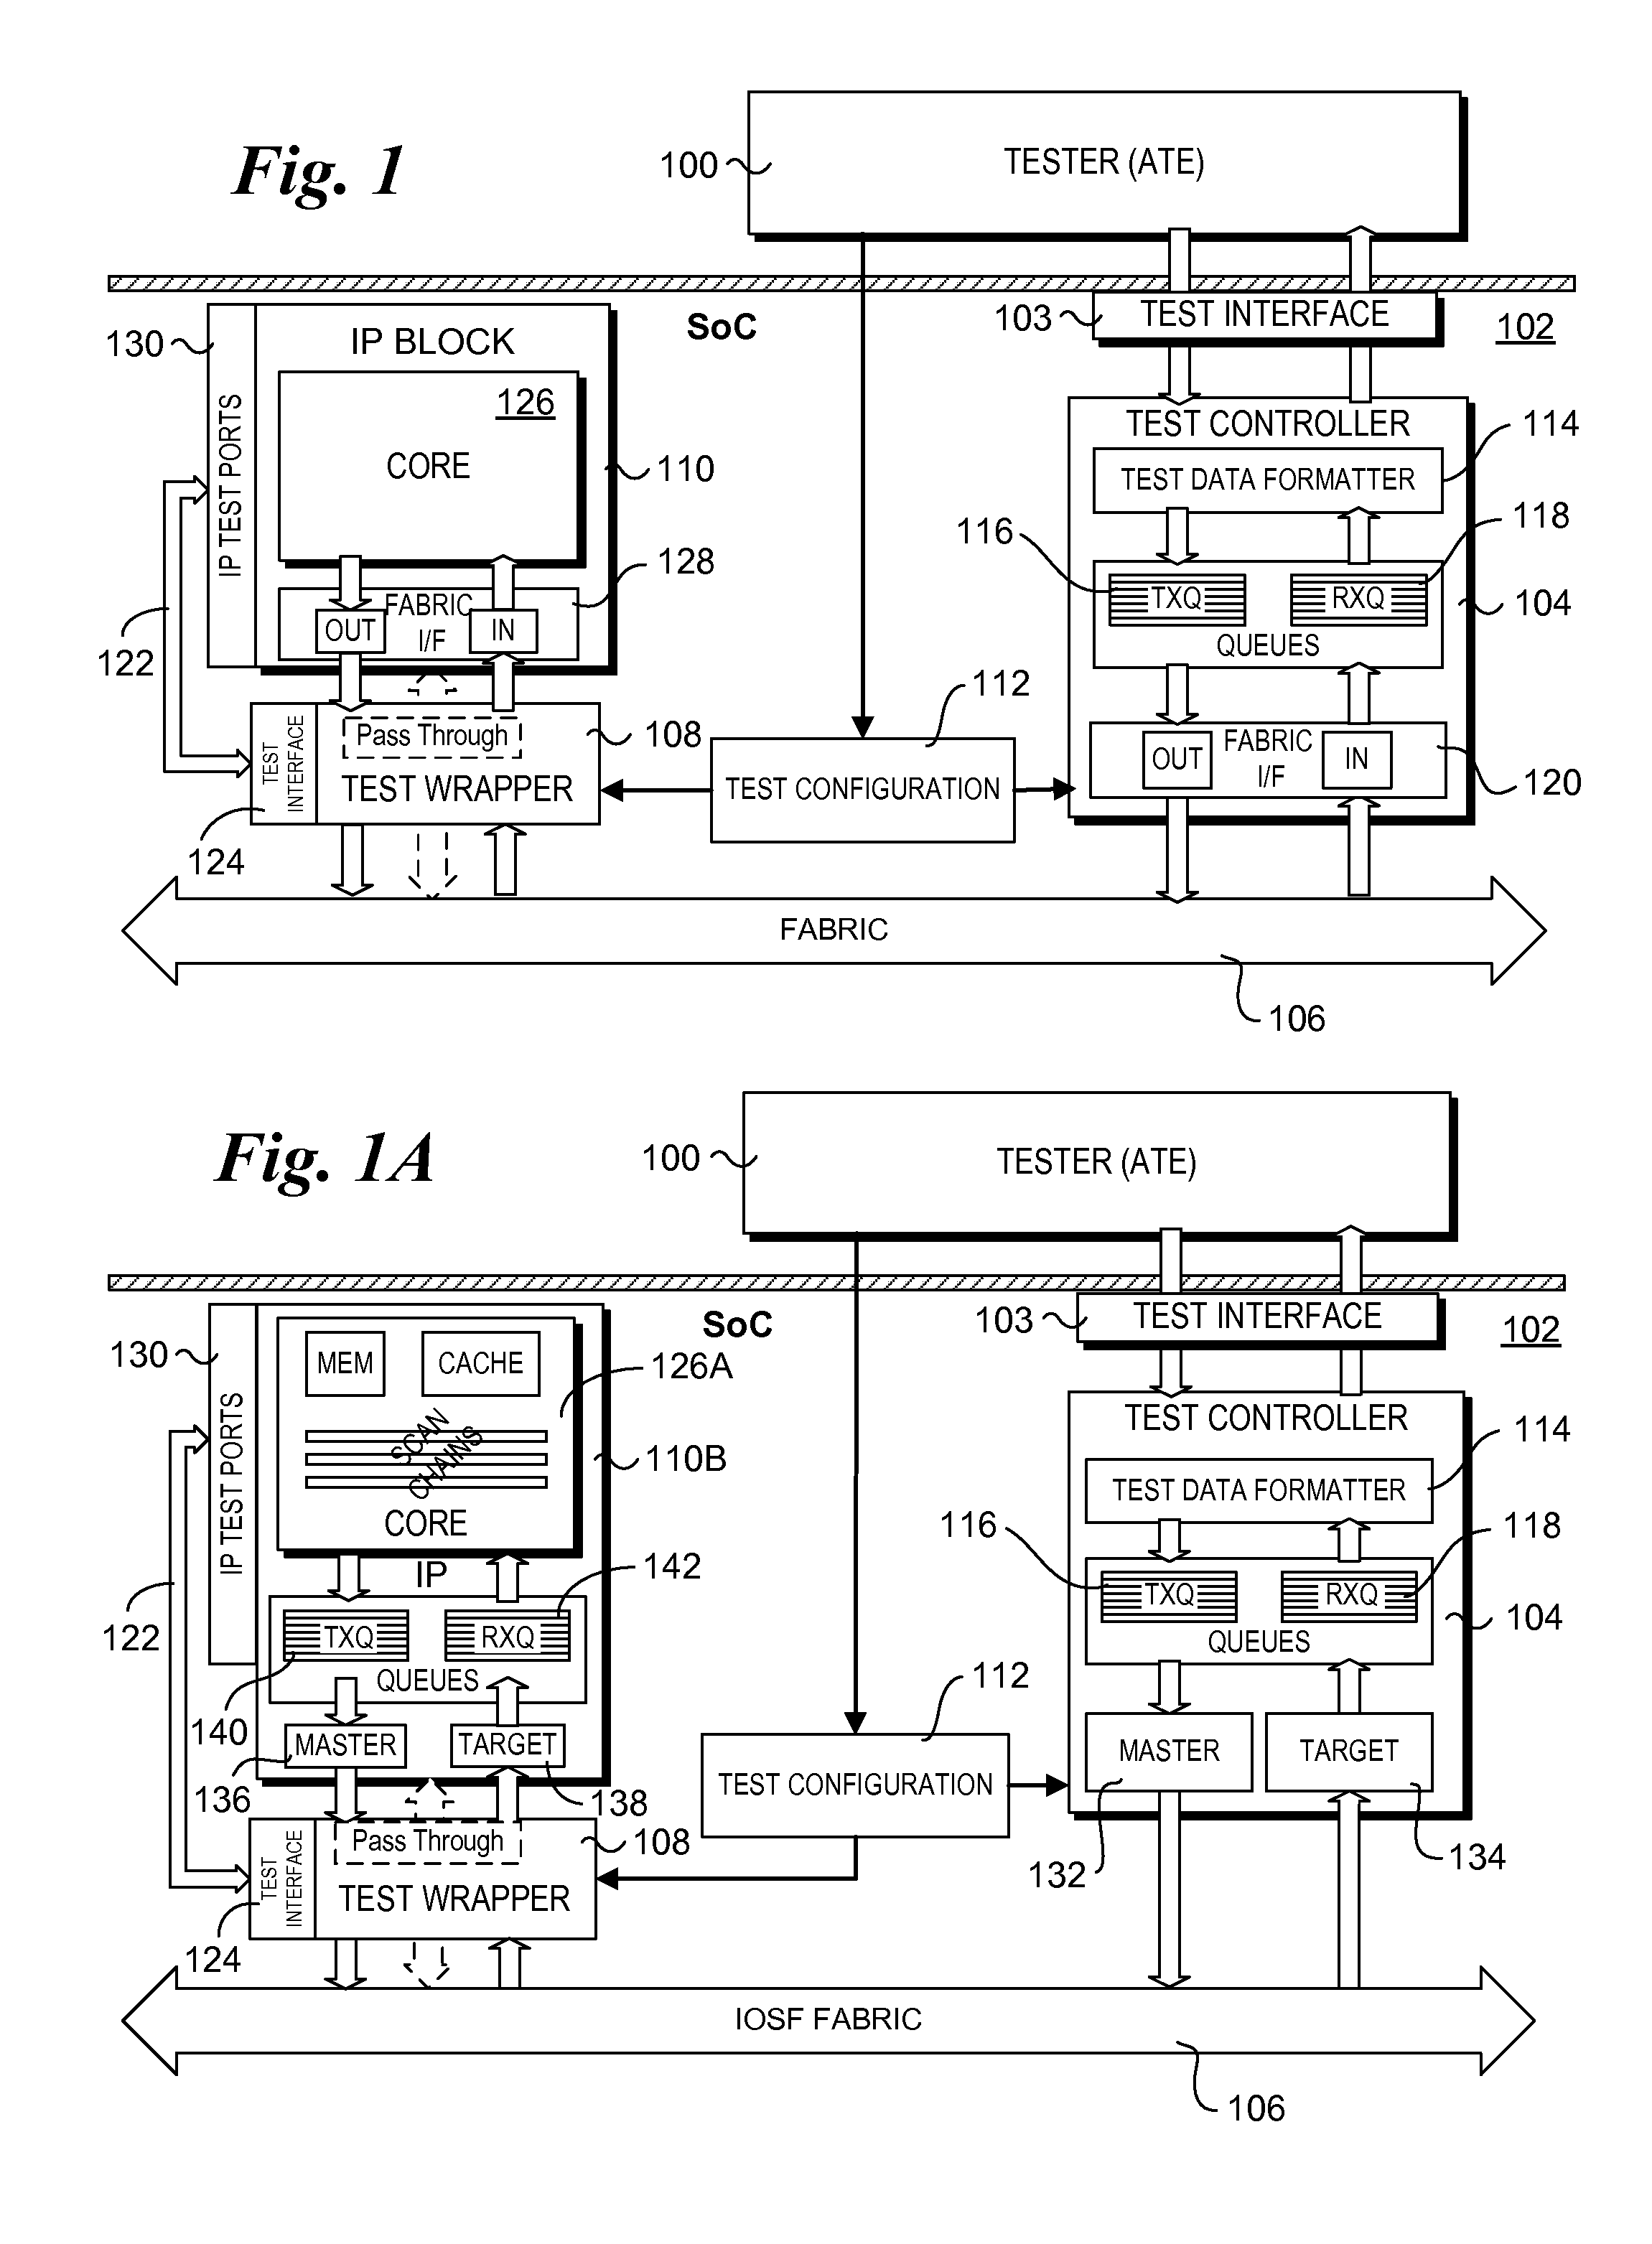 Functional fabric-based test controller for functional and structural test and debug